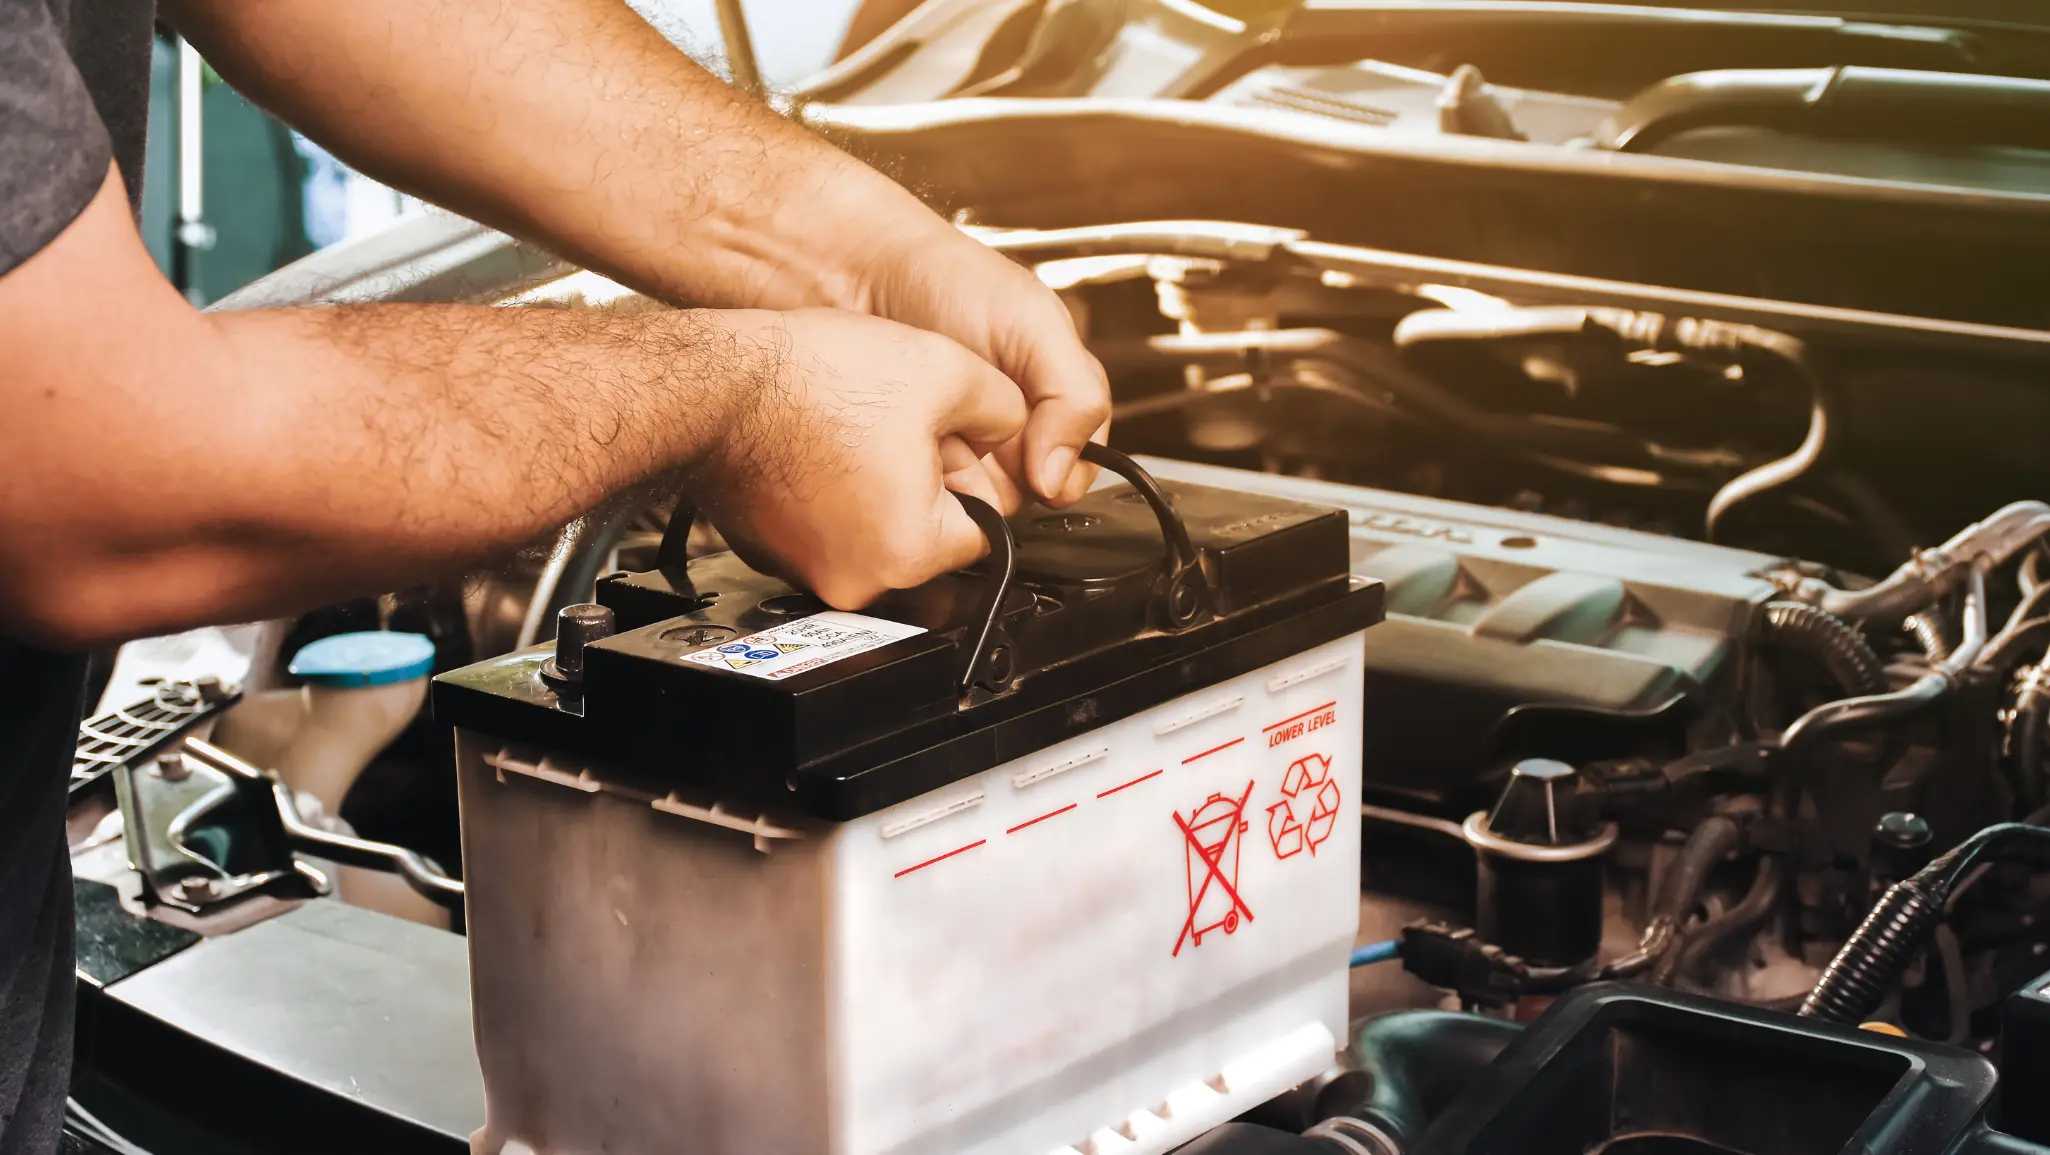 Get Reliable, On-Site Vehicle Battery Replacement – Anytime, Anywhere!